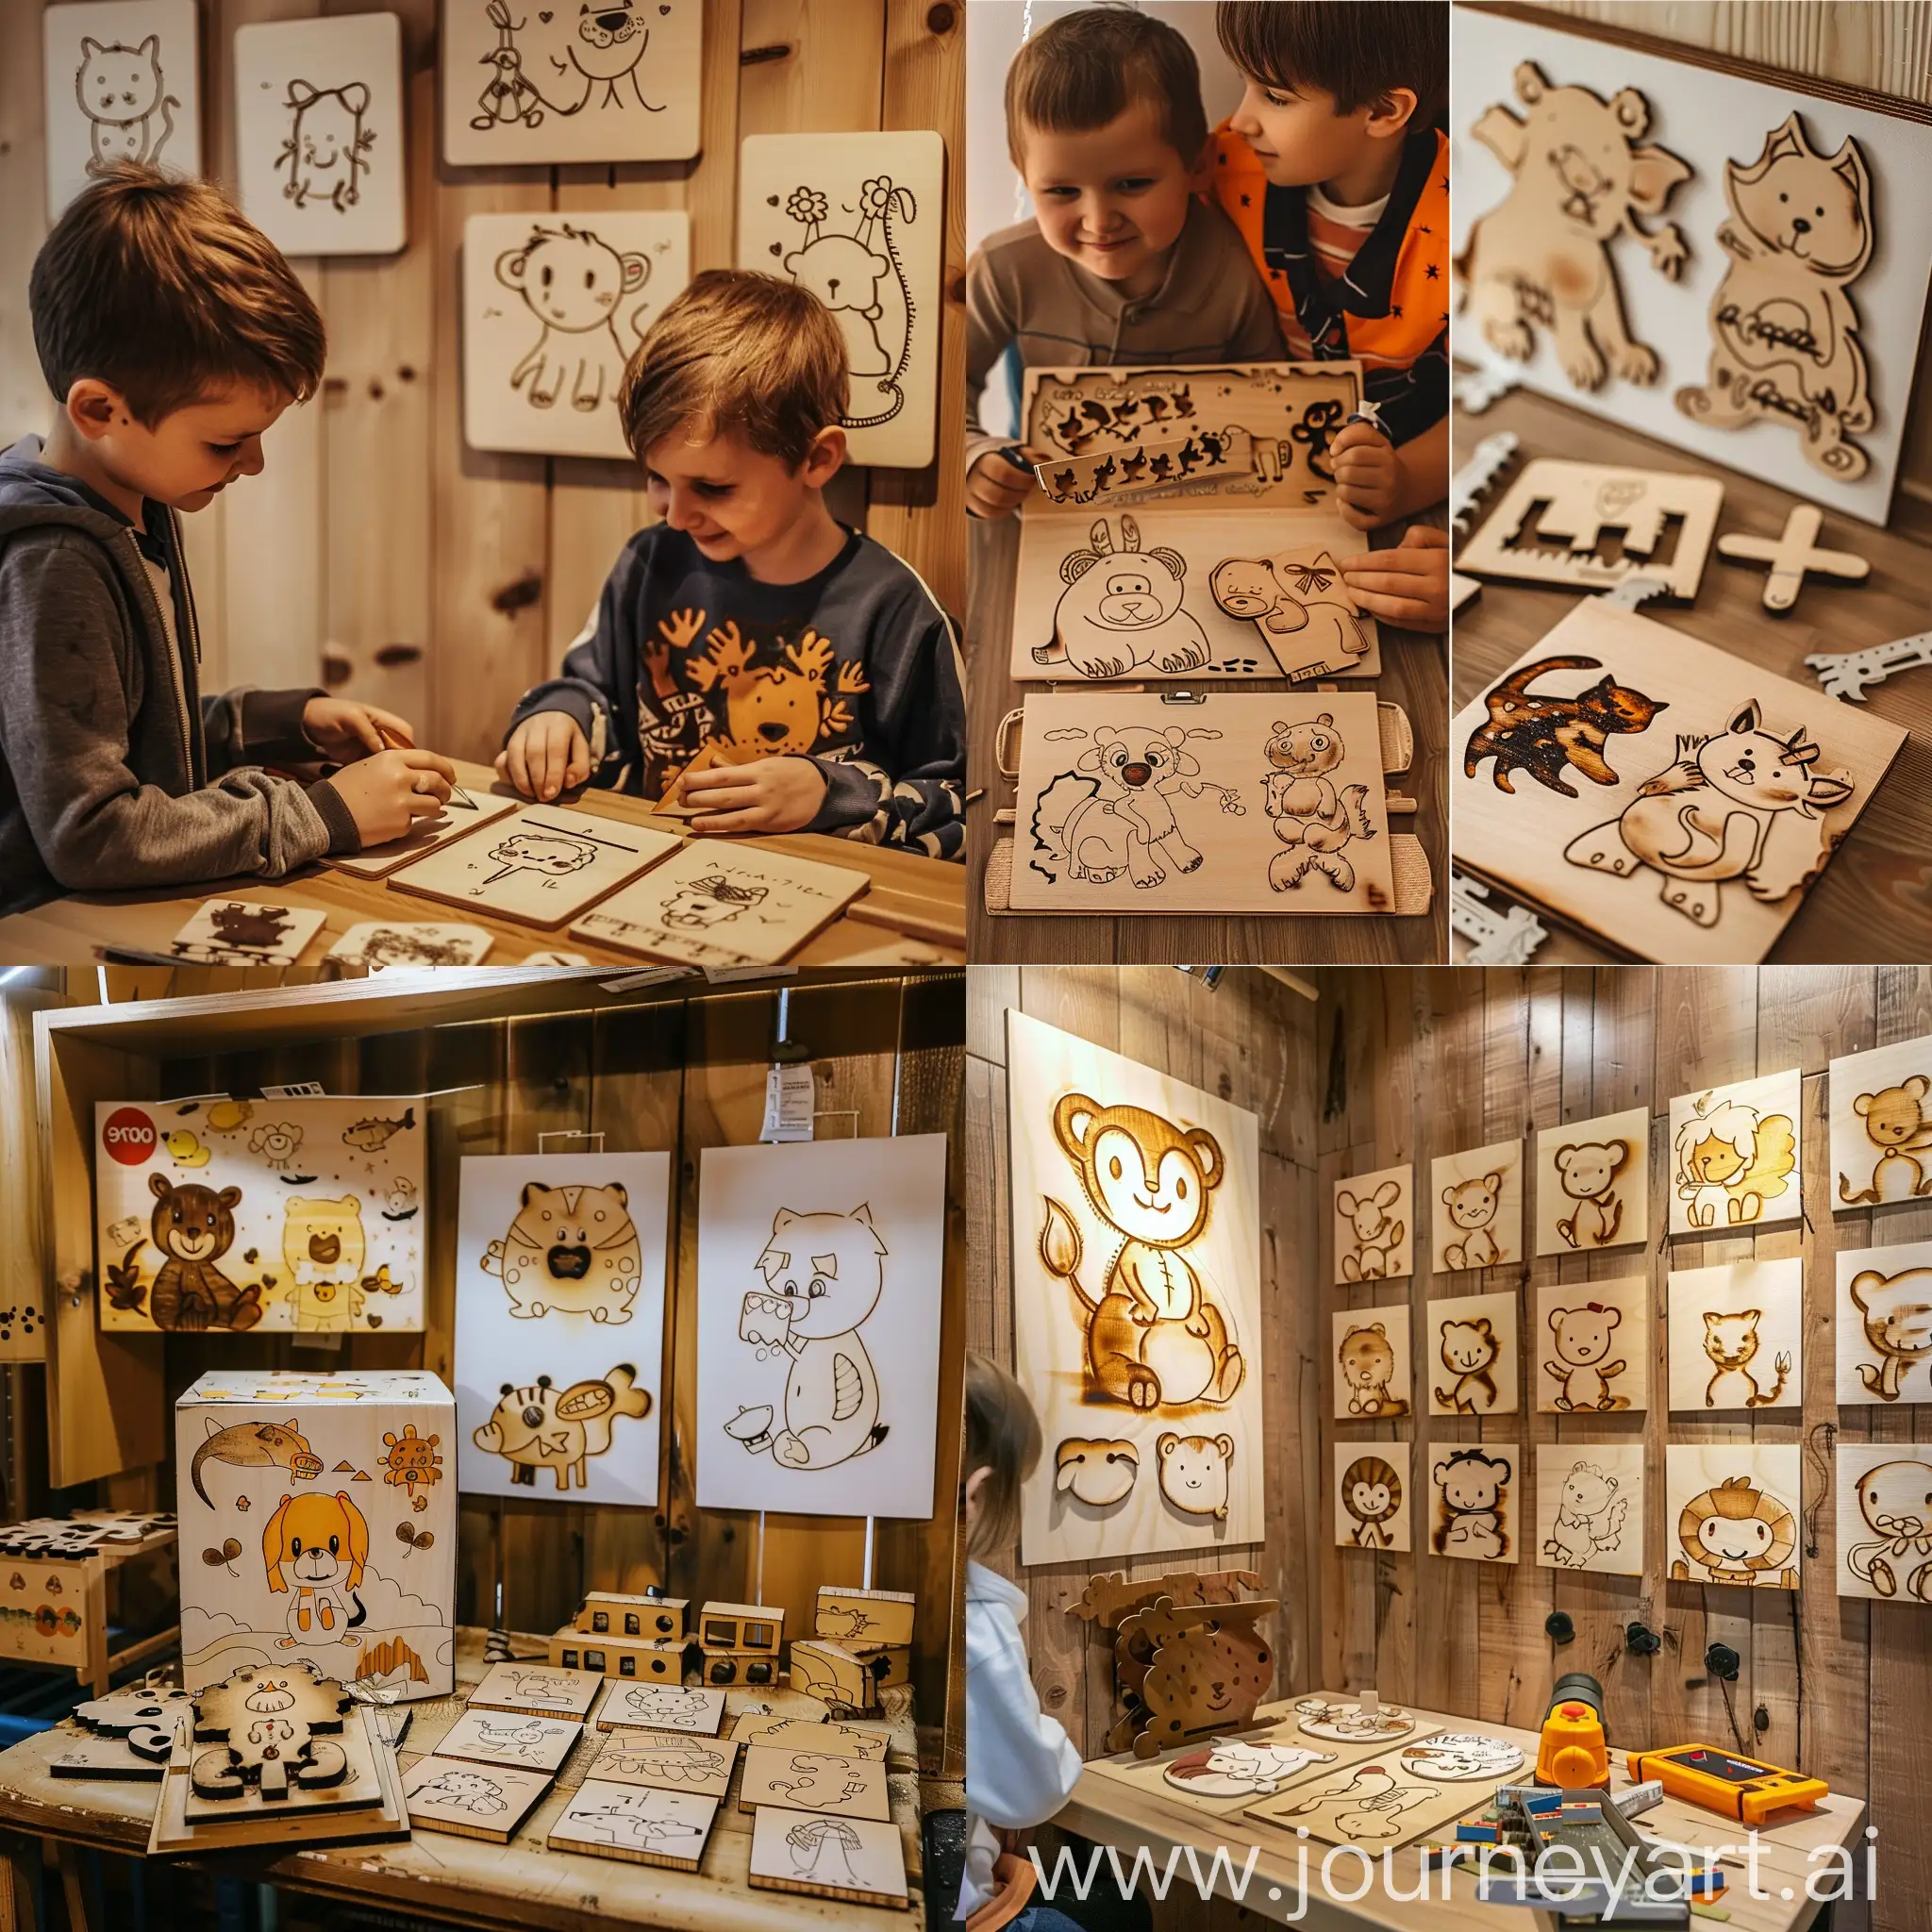 Family-Wood-Burning-Crafts-Parents-and-Children-Creating-Cute-Animal-Art-on-Plywood